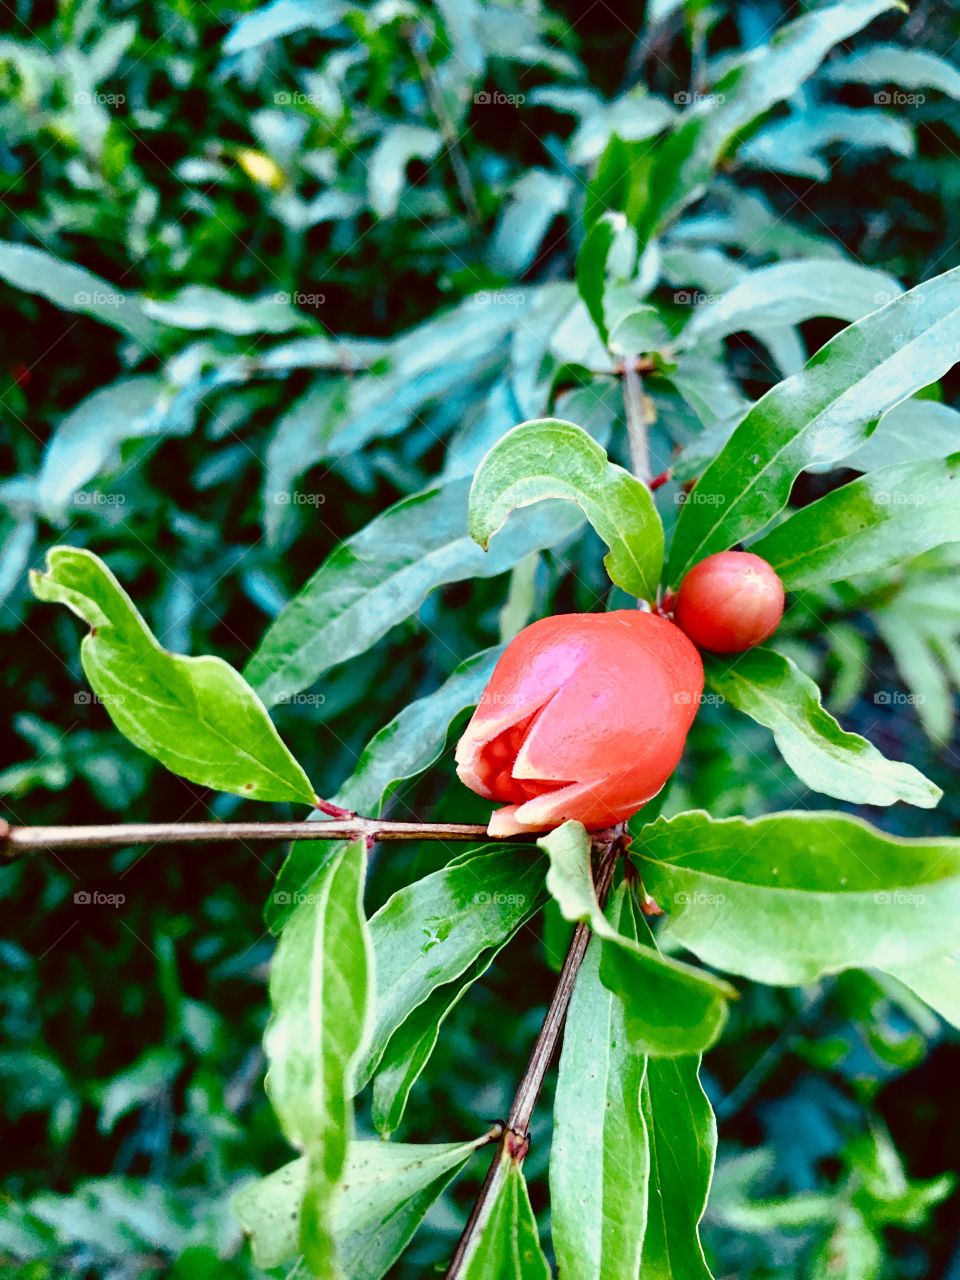 Pomegranate blossoming in my garden.  